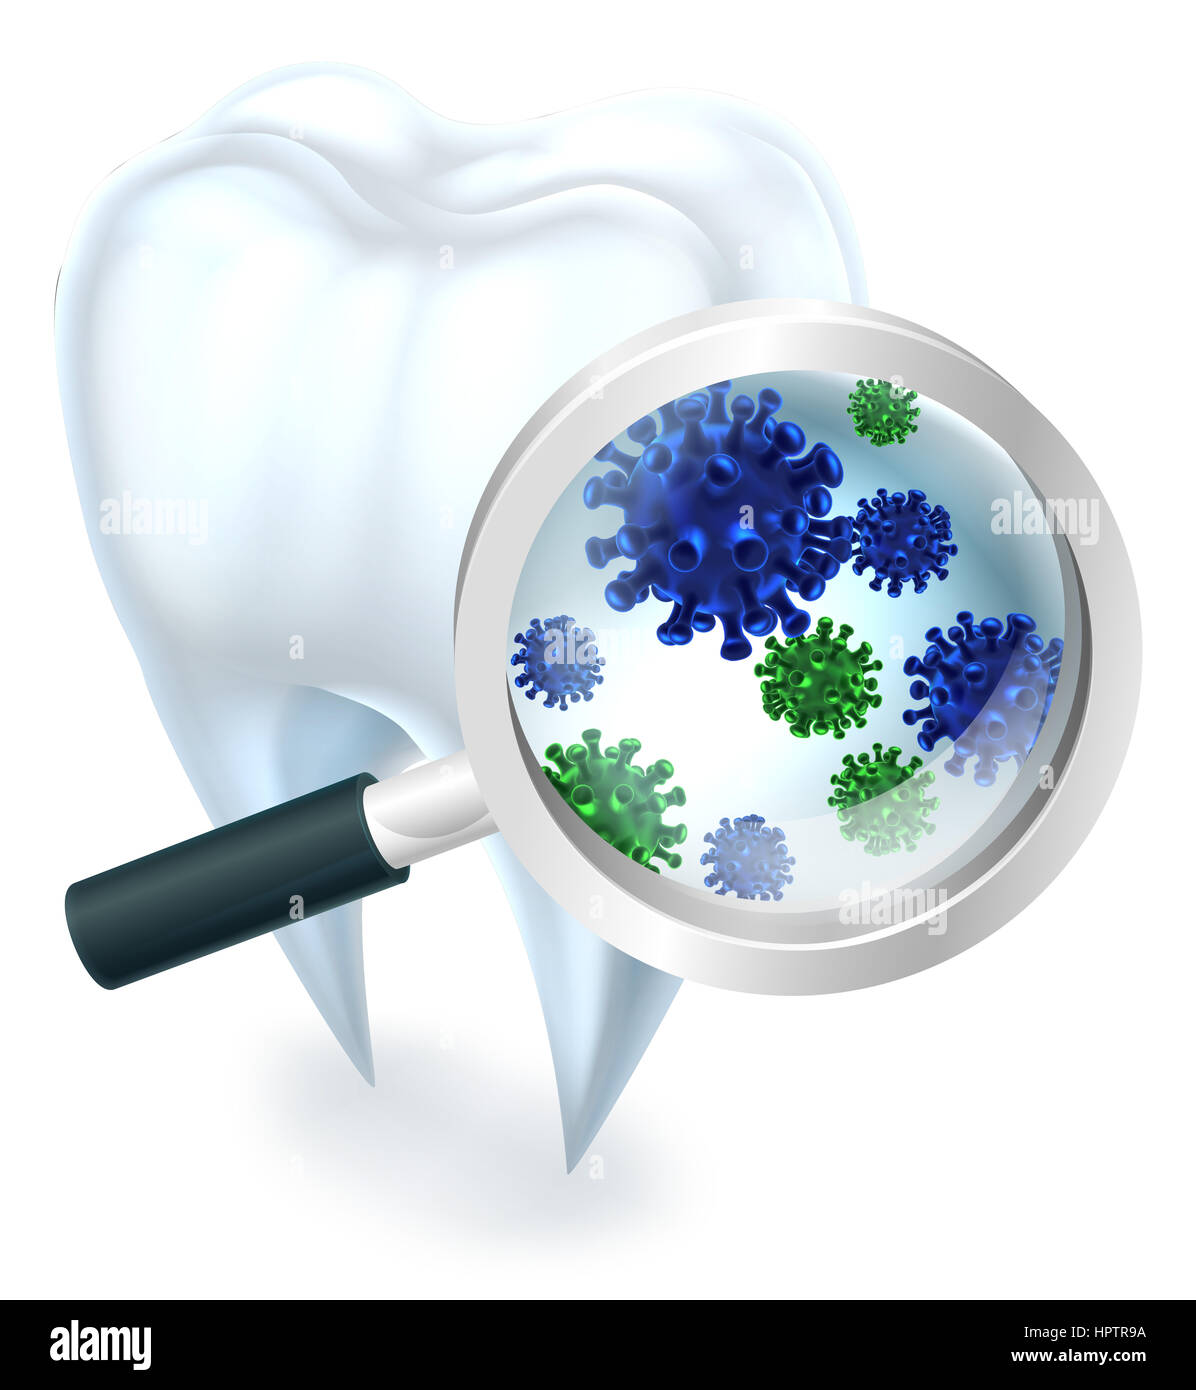 A medical dental illustration of a tooth covered in bacteria viewed through a magnifying glass Stock Photo